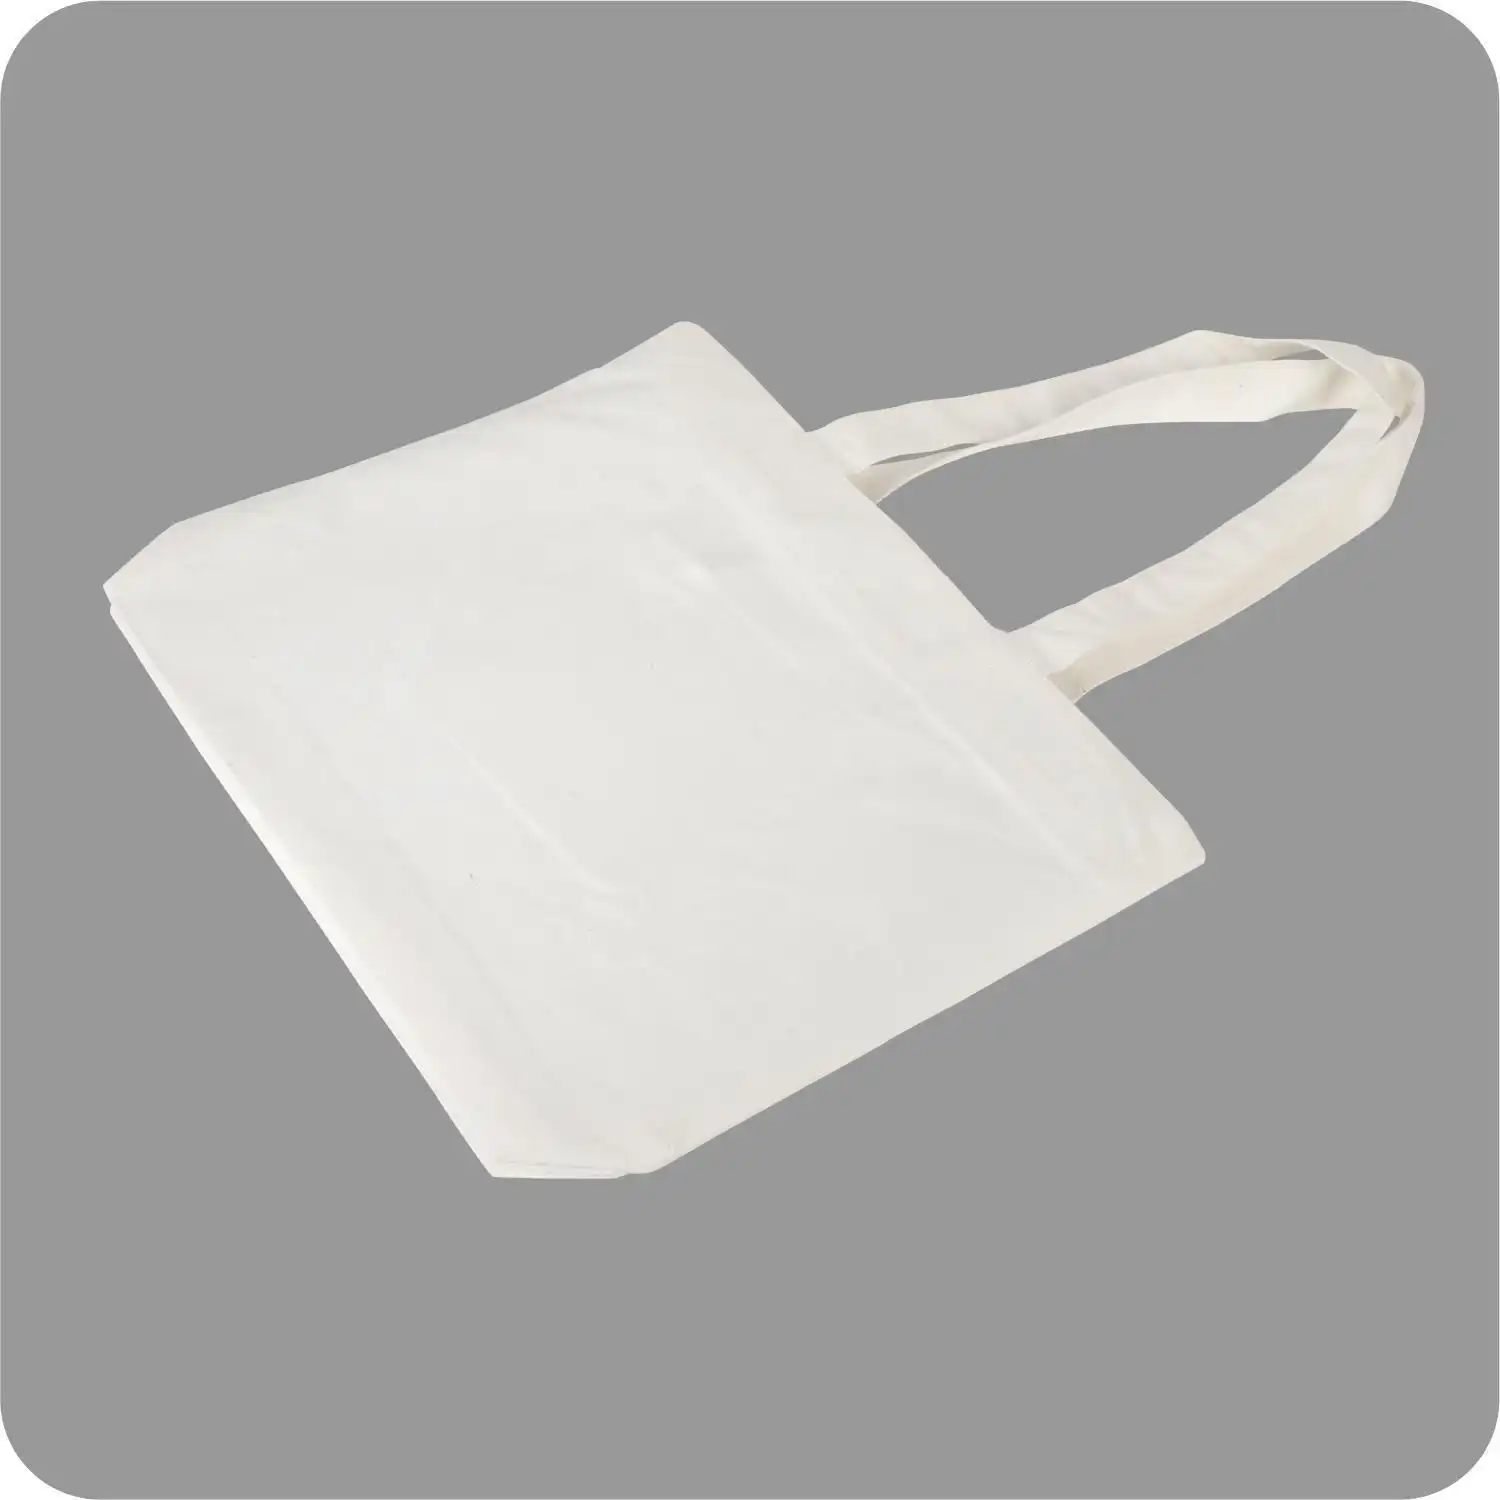 Lightweight Environmental Friendly, Heavily Loaded Canvas Tote Bags